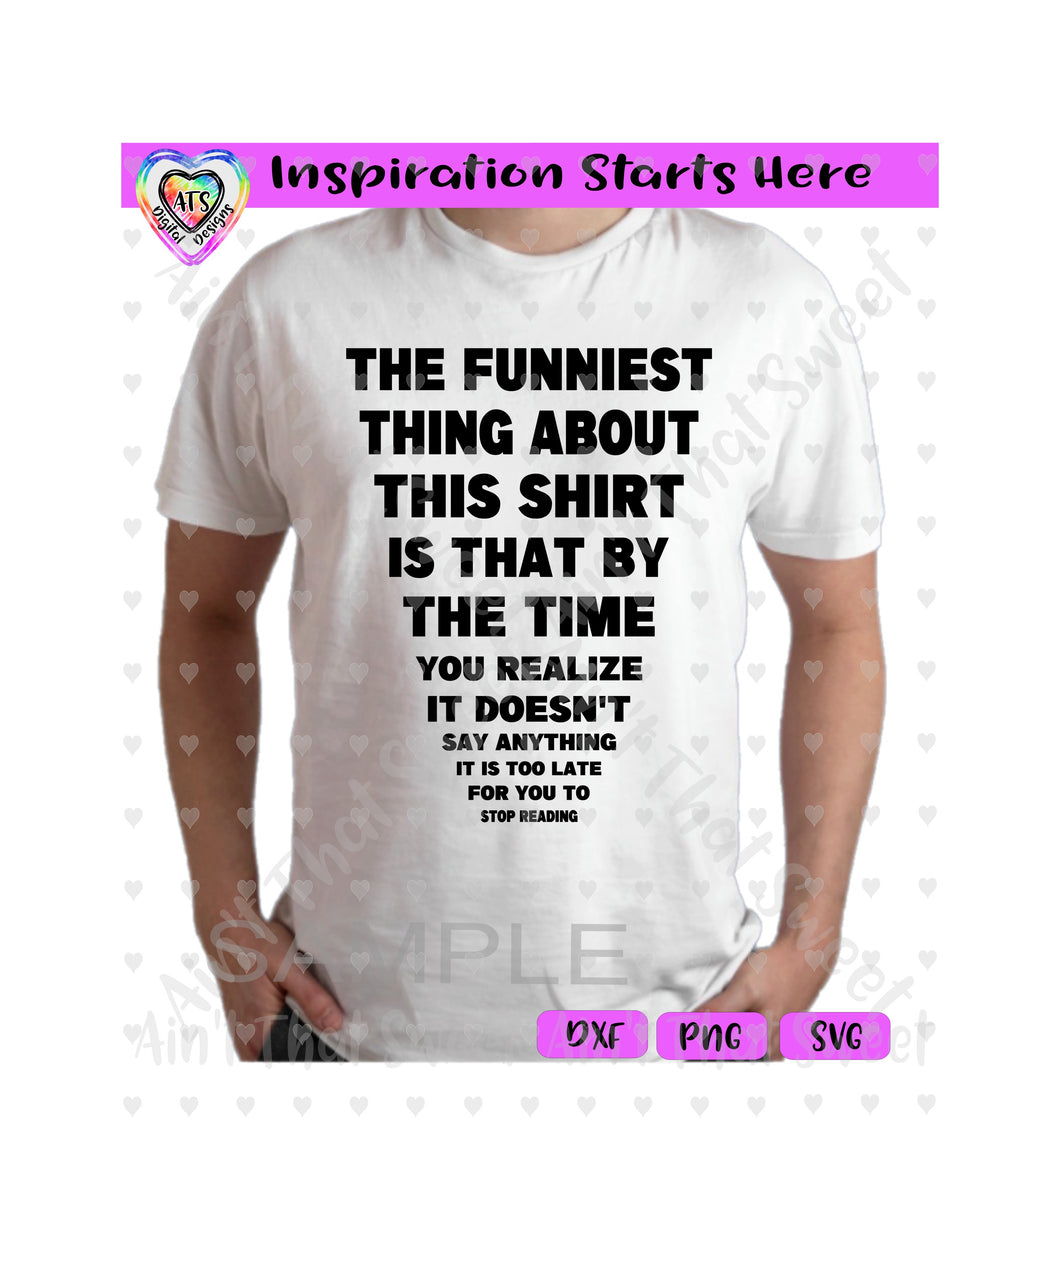 The Funniest Thing About This Shirt - Transparent PNG SVG DXF - Silhouette, Cricut, ScanNCut